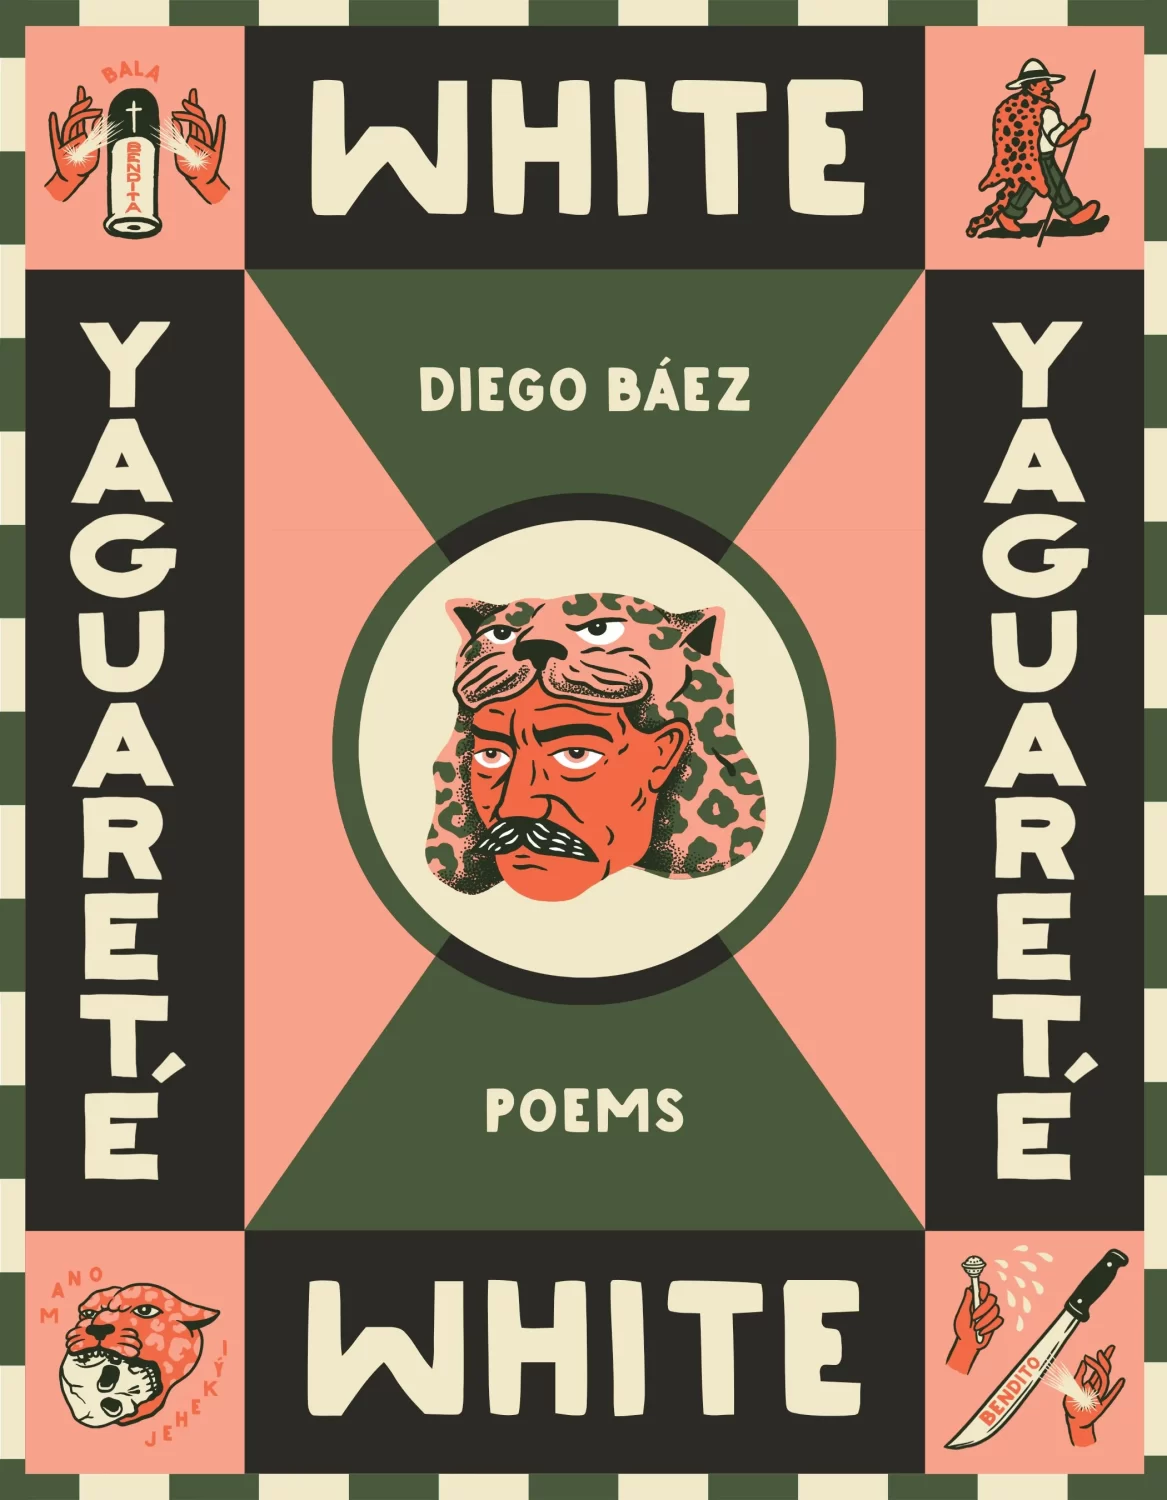 Yaguareté White cover, pink and green with an indigenous male figure wearing a jaguar pelt on his head, the text Yaguareté White and Diego Baez in white.